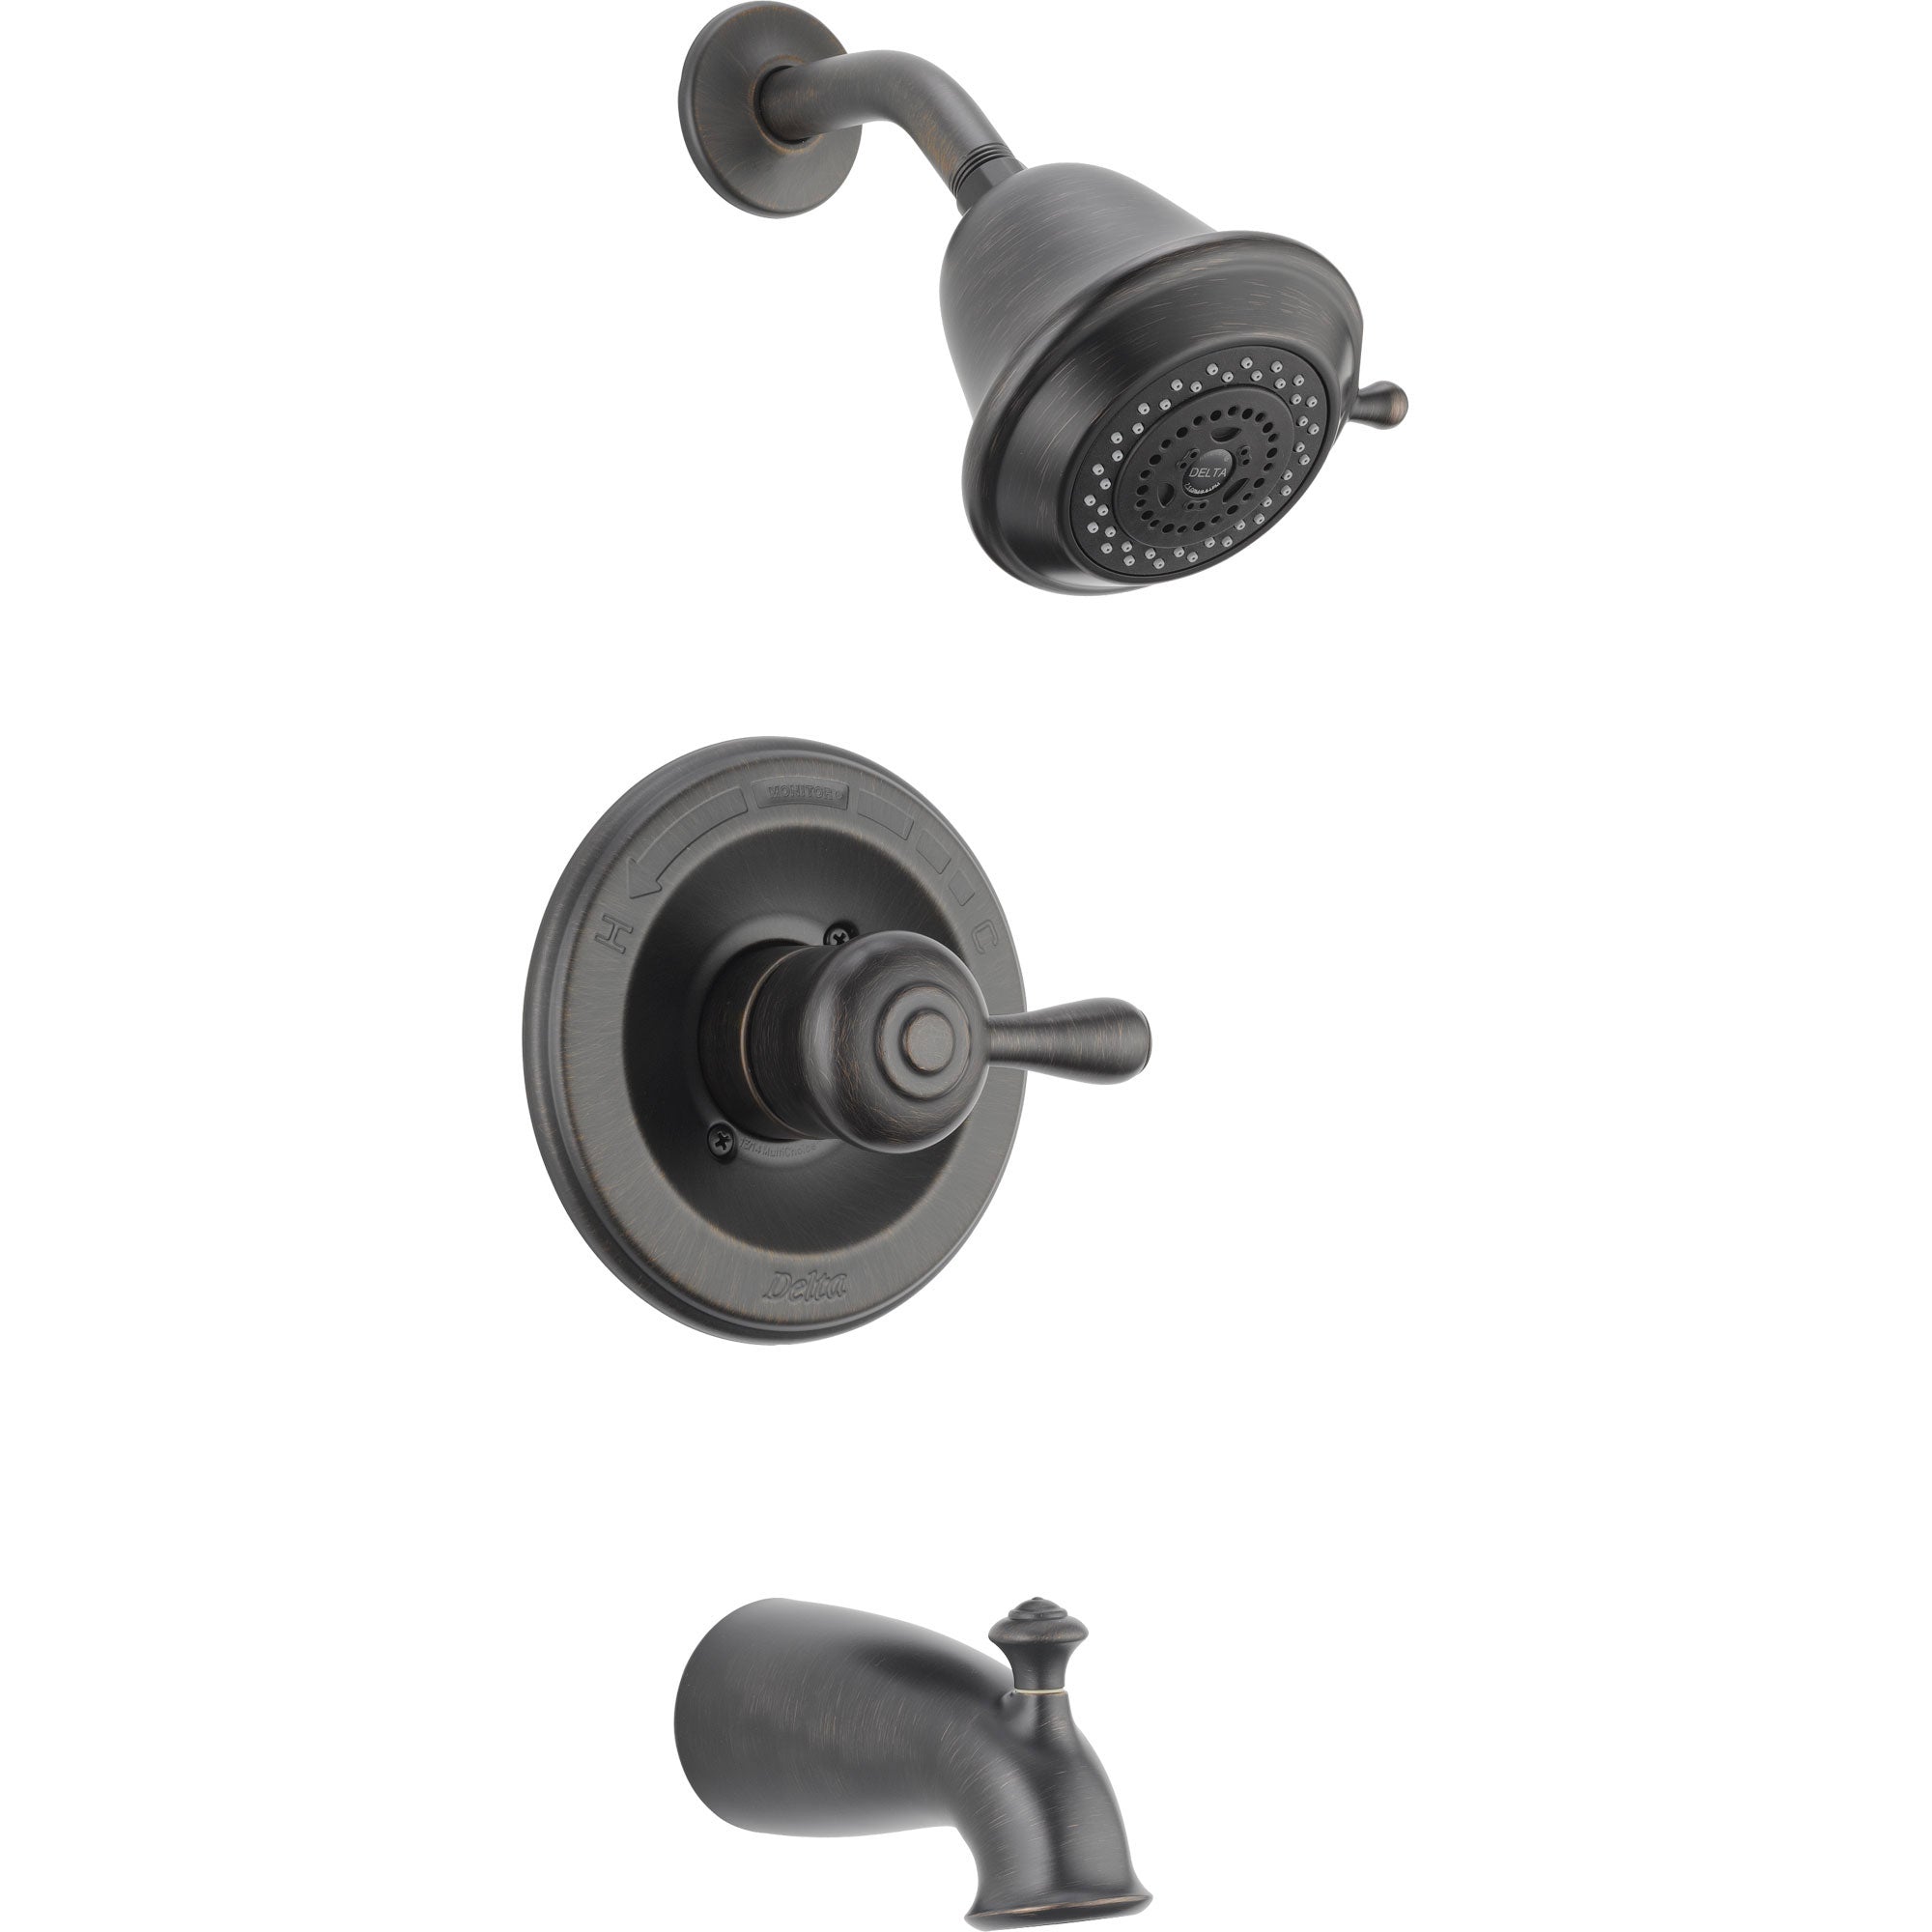 Delta Leland Monitor 14 Series Venetian Bronze Finish Single Lever Handle Tub and Shower Faucet Combo INCLUDES Rough-in Valve with Stops D1323V